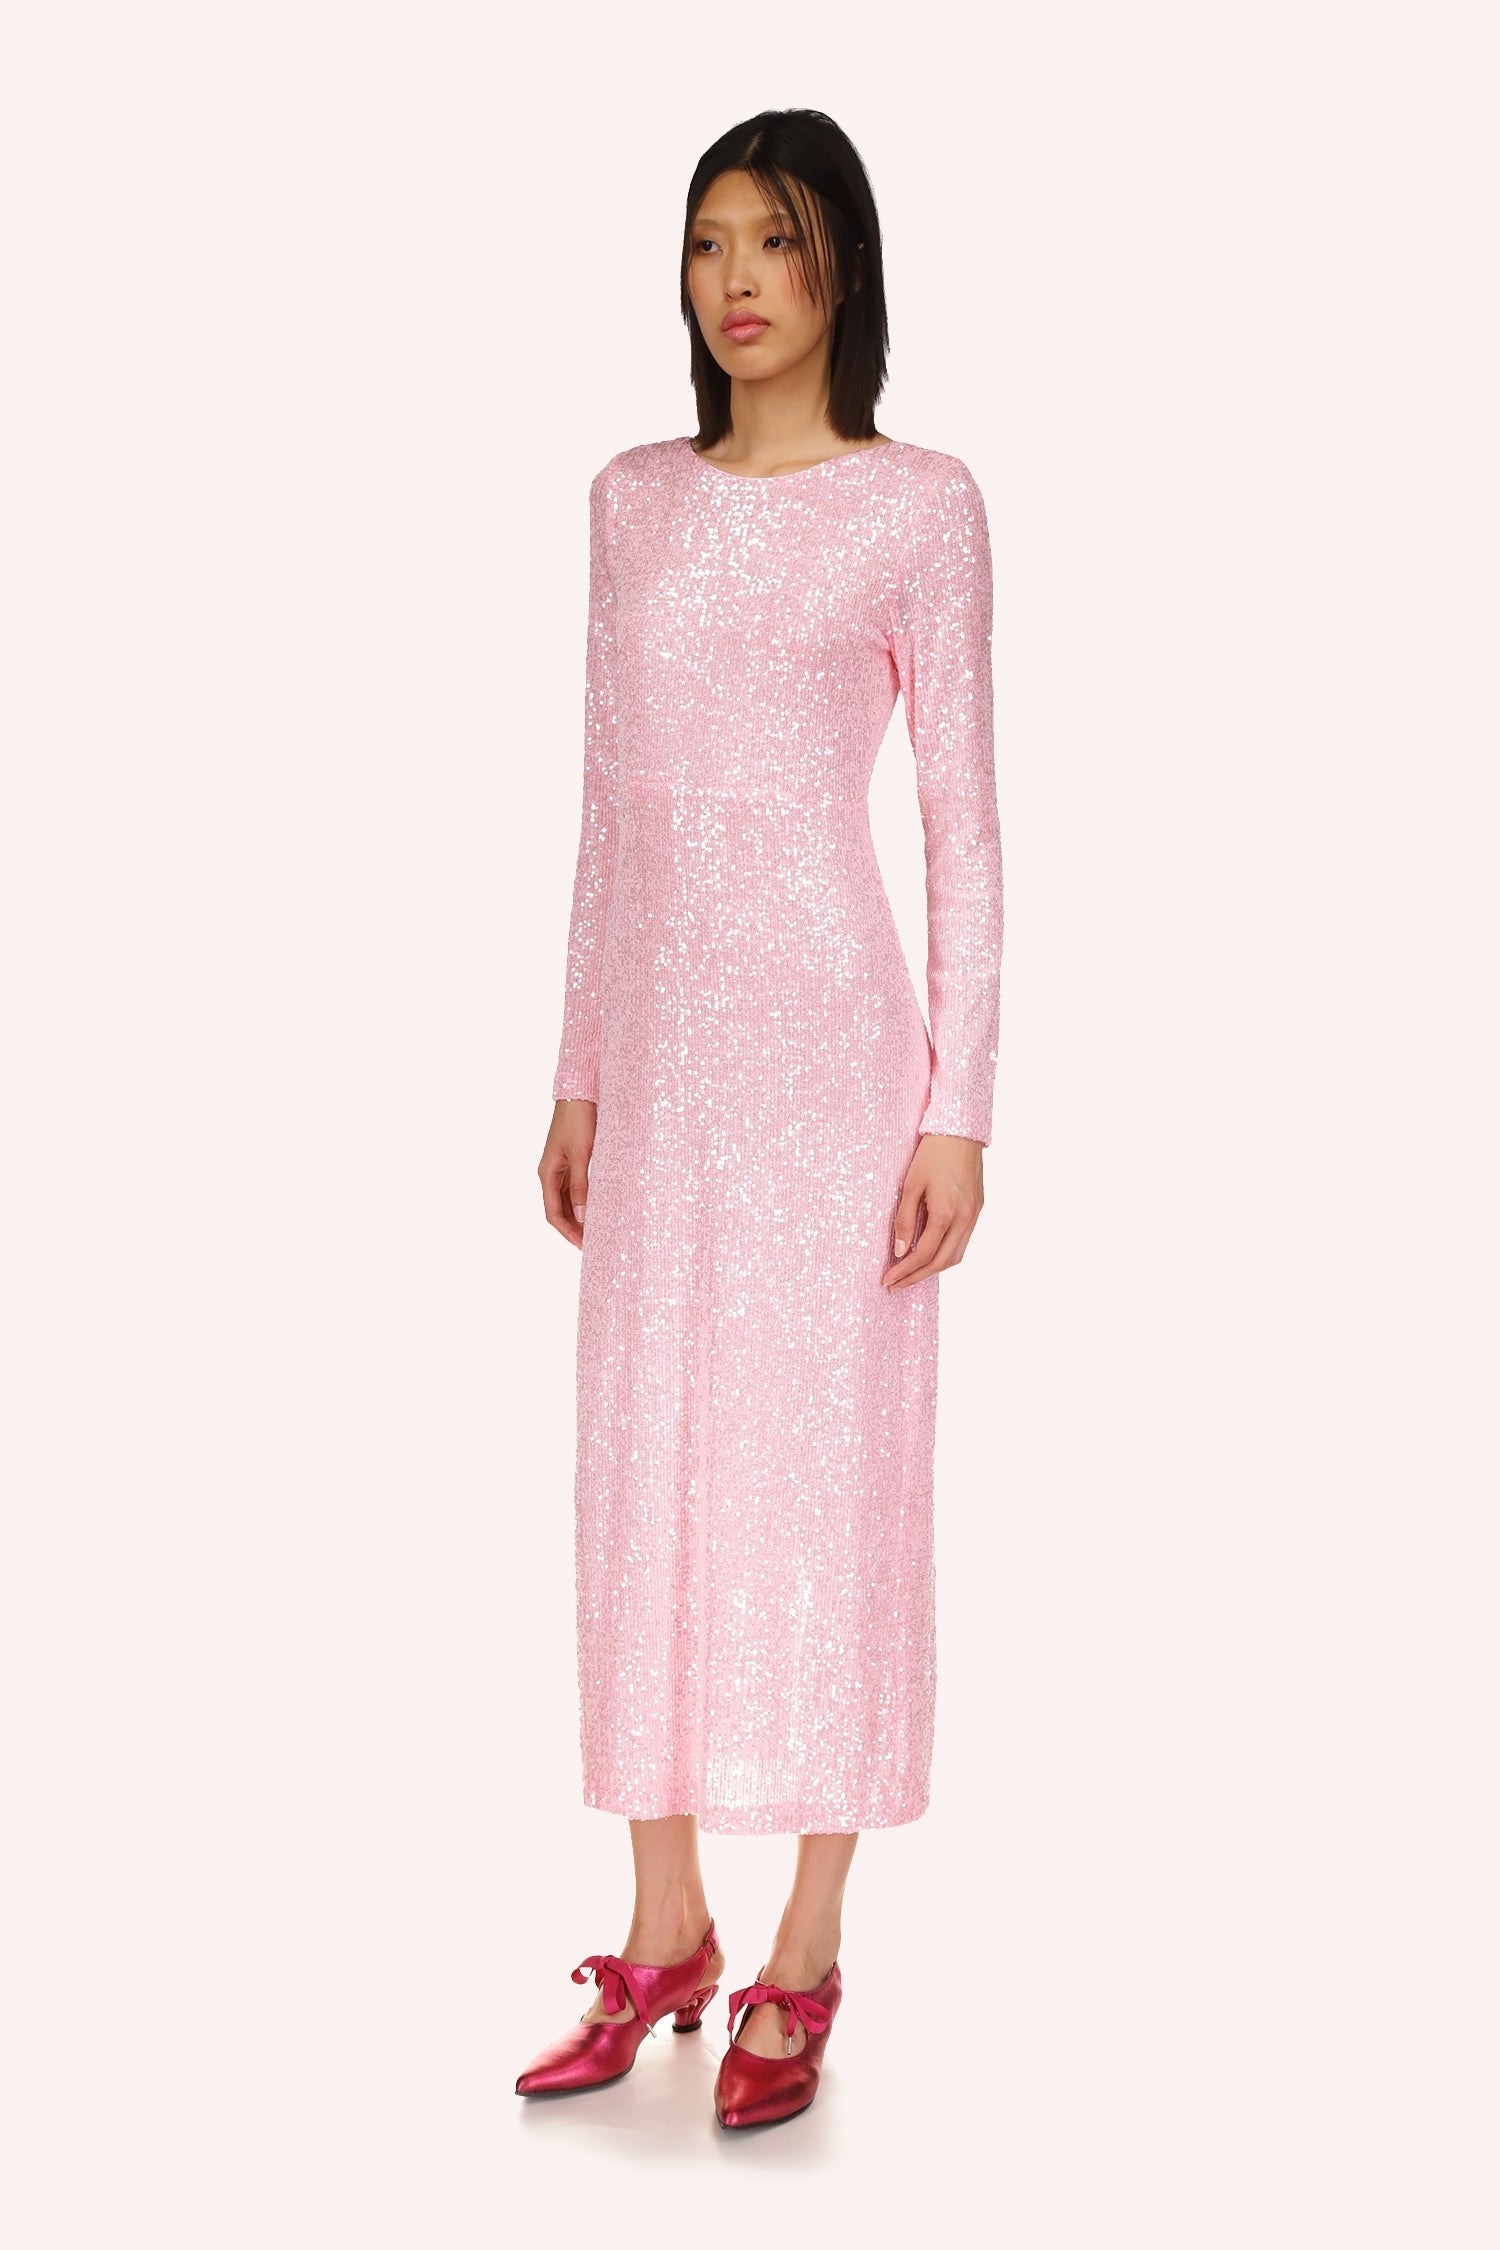 The Sequin Mesh Dress Baby Pink, designed by Anna Sui, is a sophisticated gown in a soft baby pink color